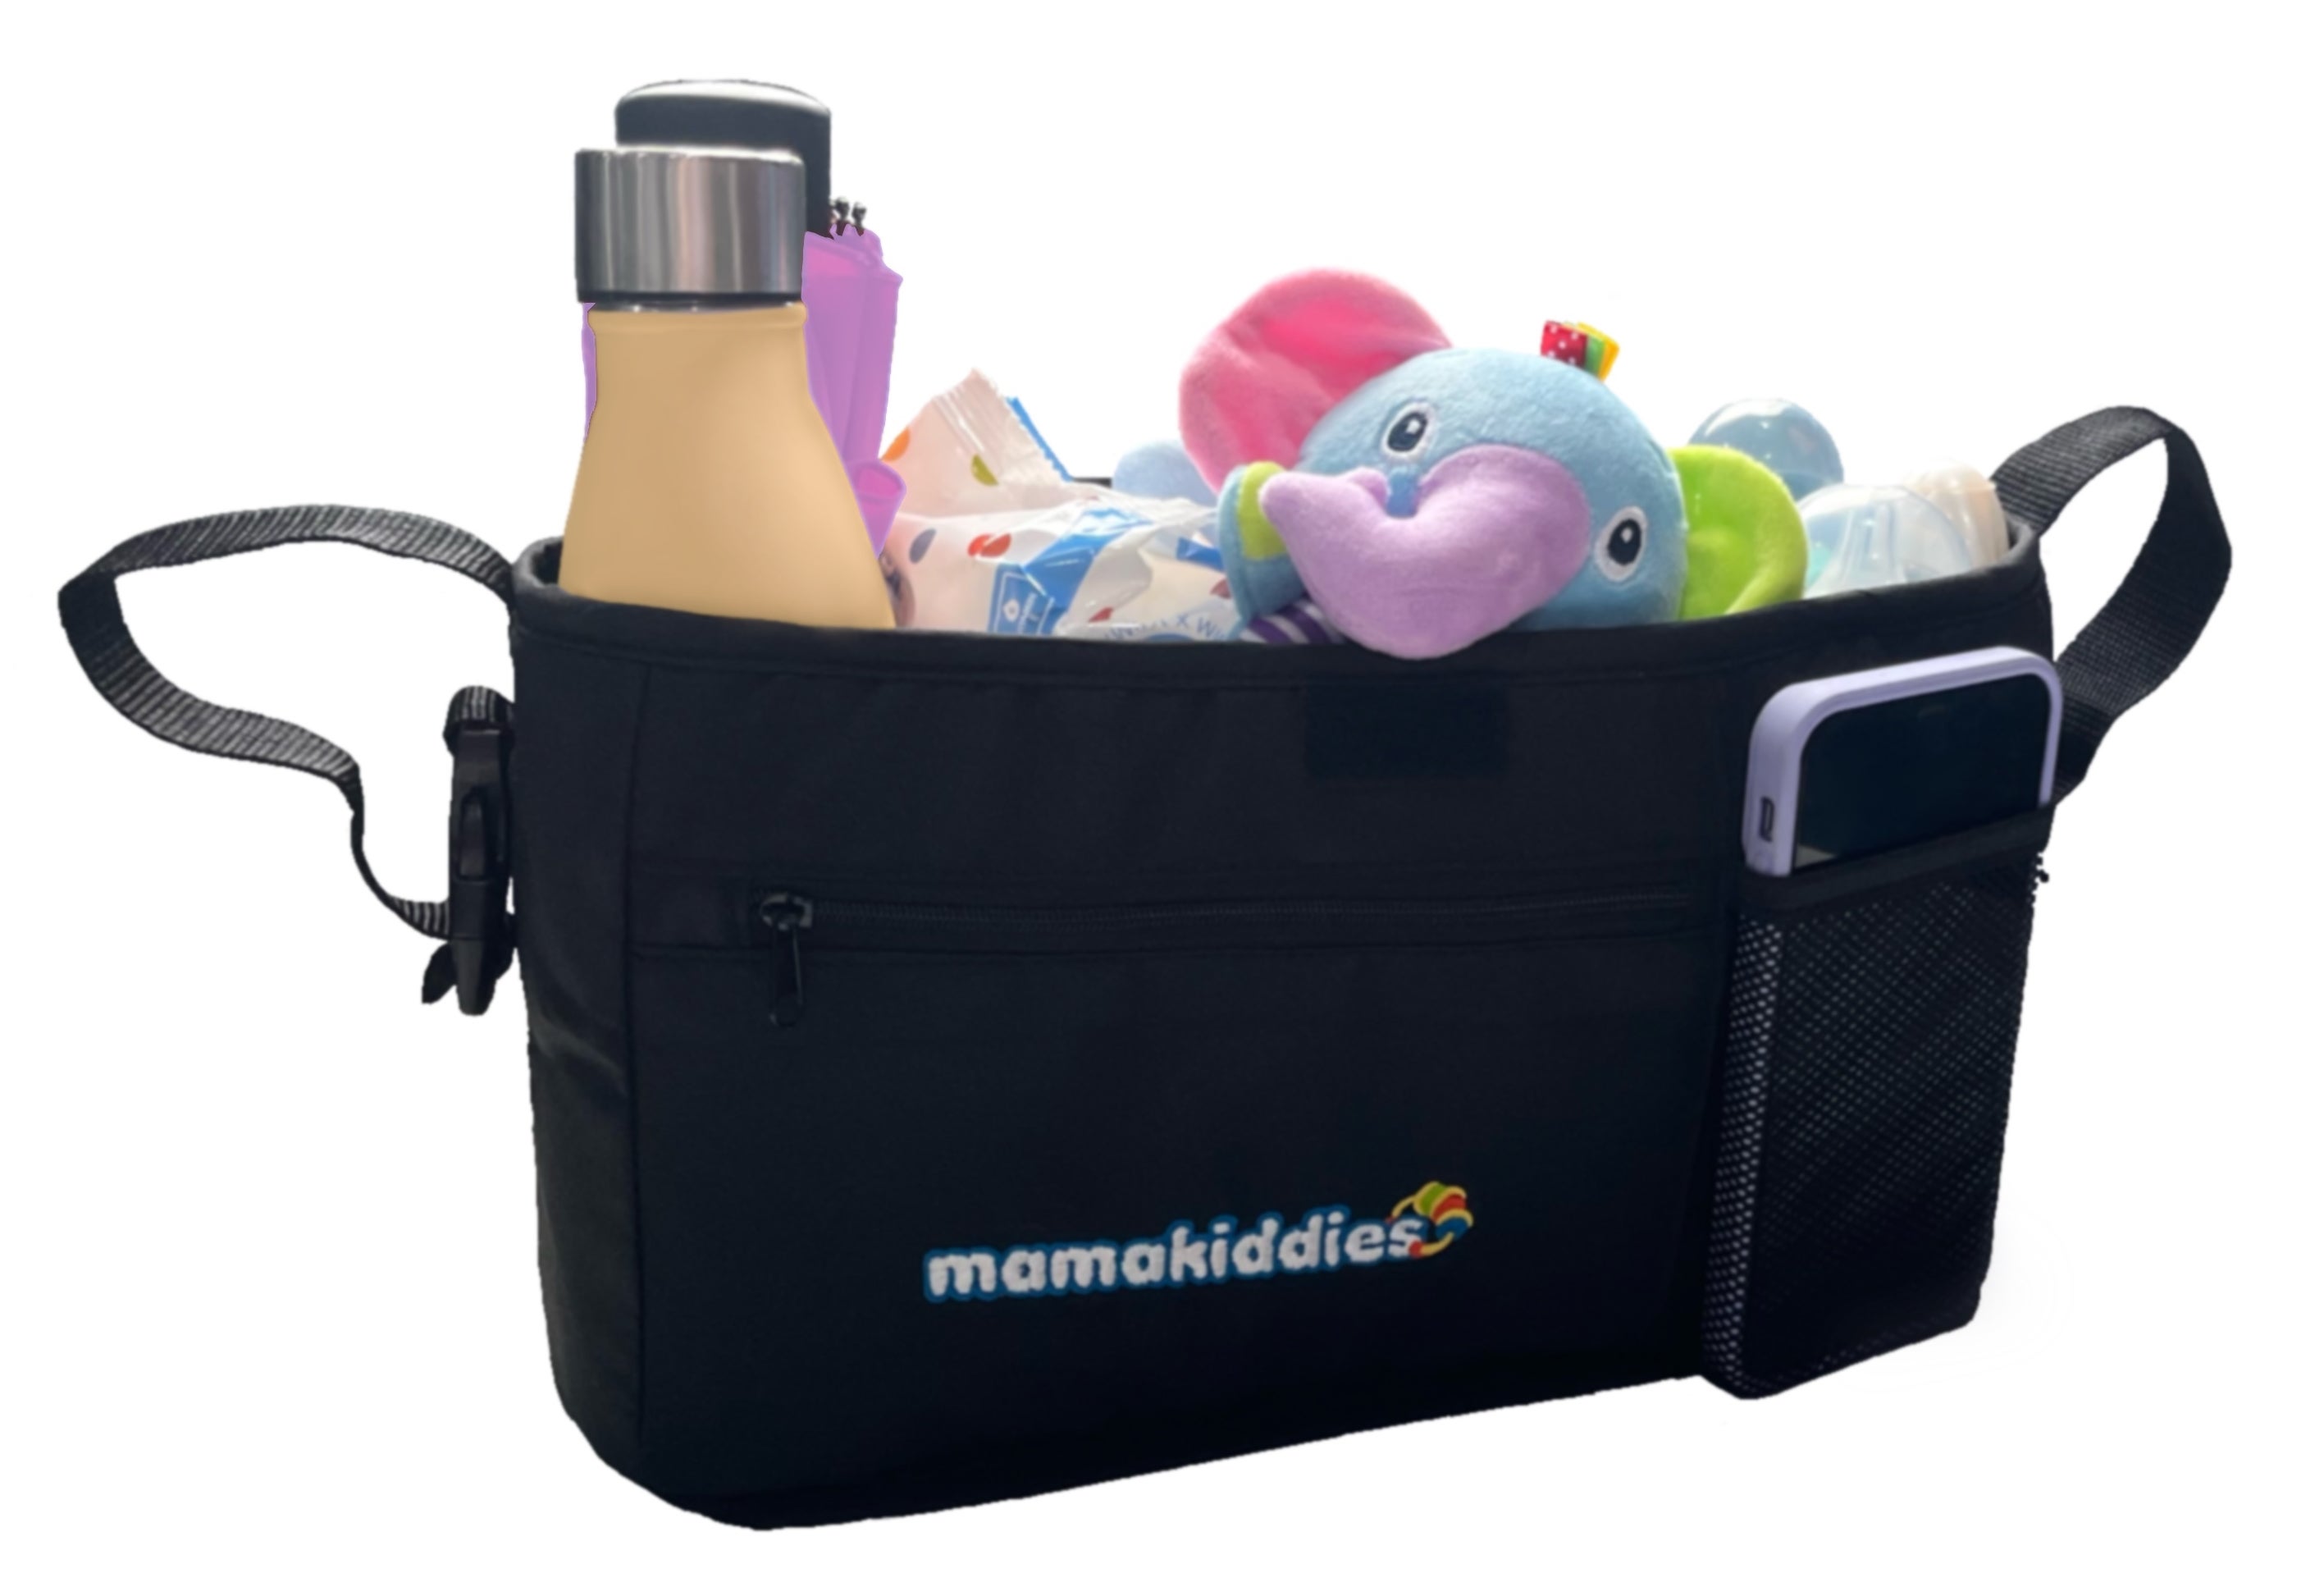 MamaKiddies Baby Stroller Organiser Bag Universal Fit Large Pram Organiser Comes with Cup Holders Water Resistant Safe and Durable Black Colour